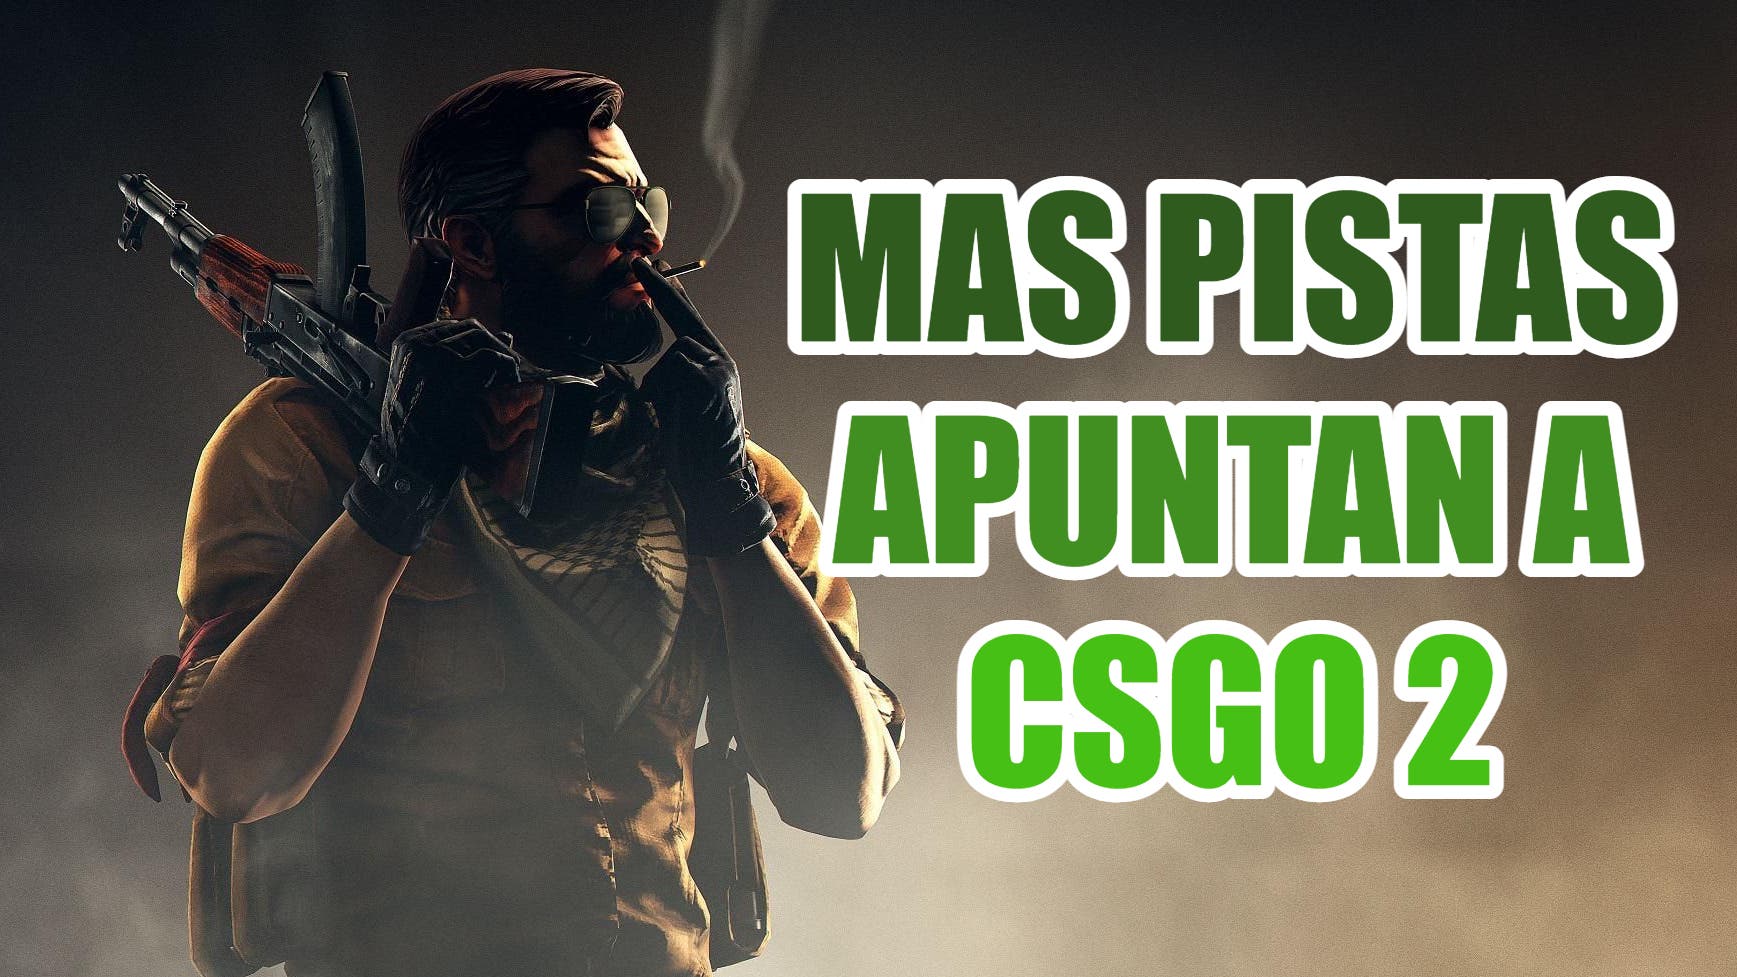 CSGO 2 Announcement Gets Even Bigger After New Clues Appear in a DOTA 2 Patch